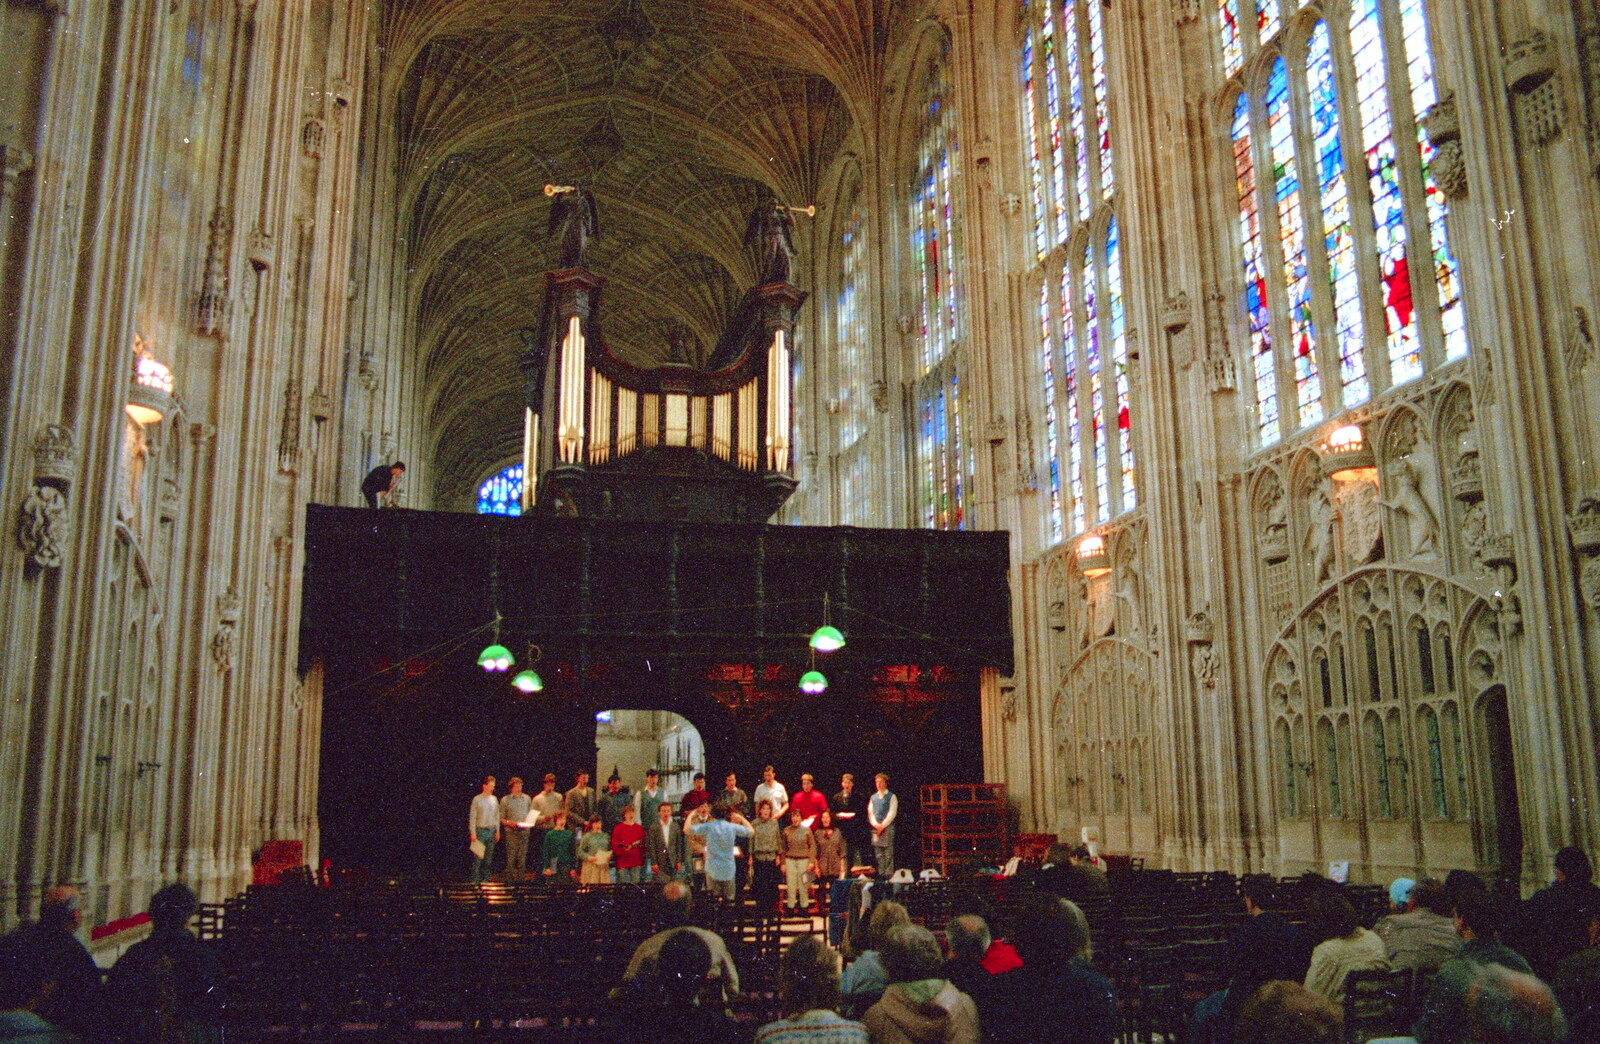 A choir practices in King's Chapel from A Trip to Trinity College, Cambridge - 23rd March 1986